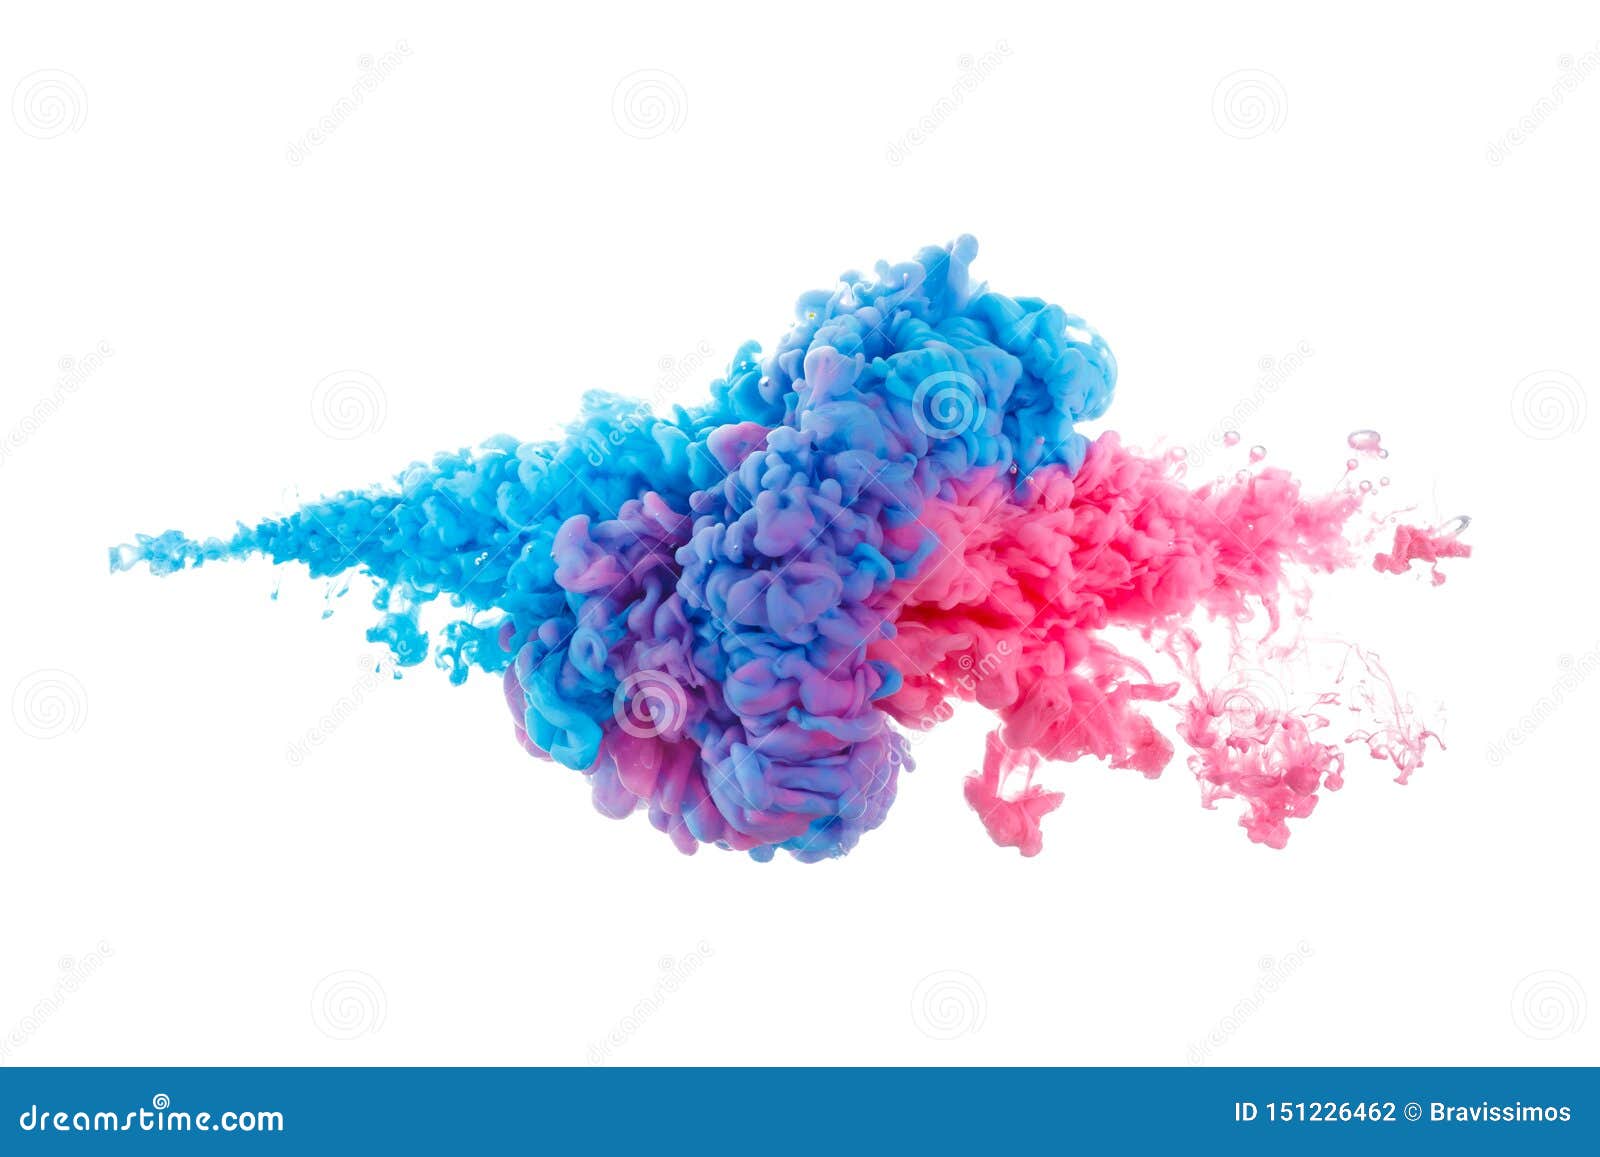 Blue and Red Paint Splash Isolated on White Background Stock Photo ...